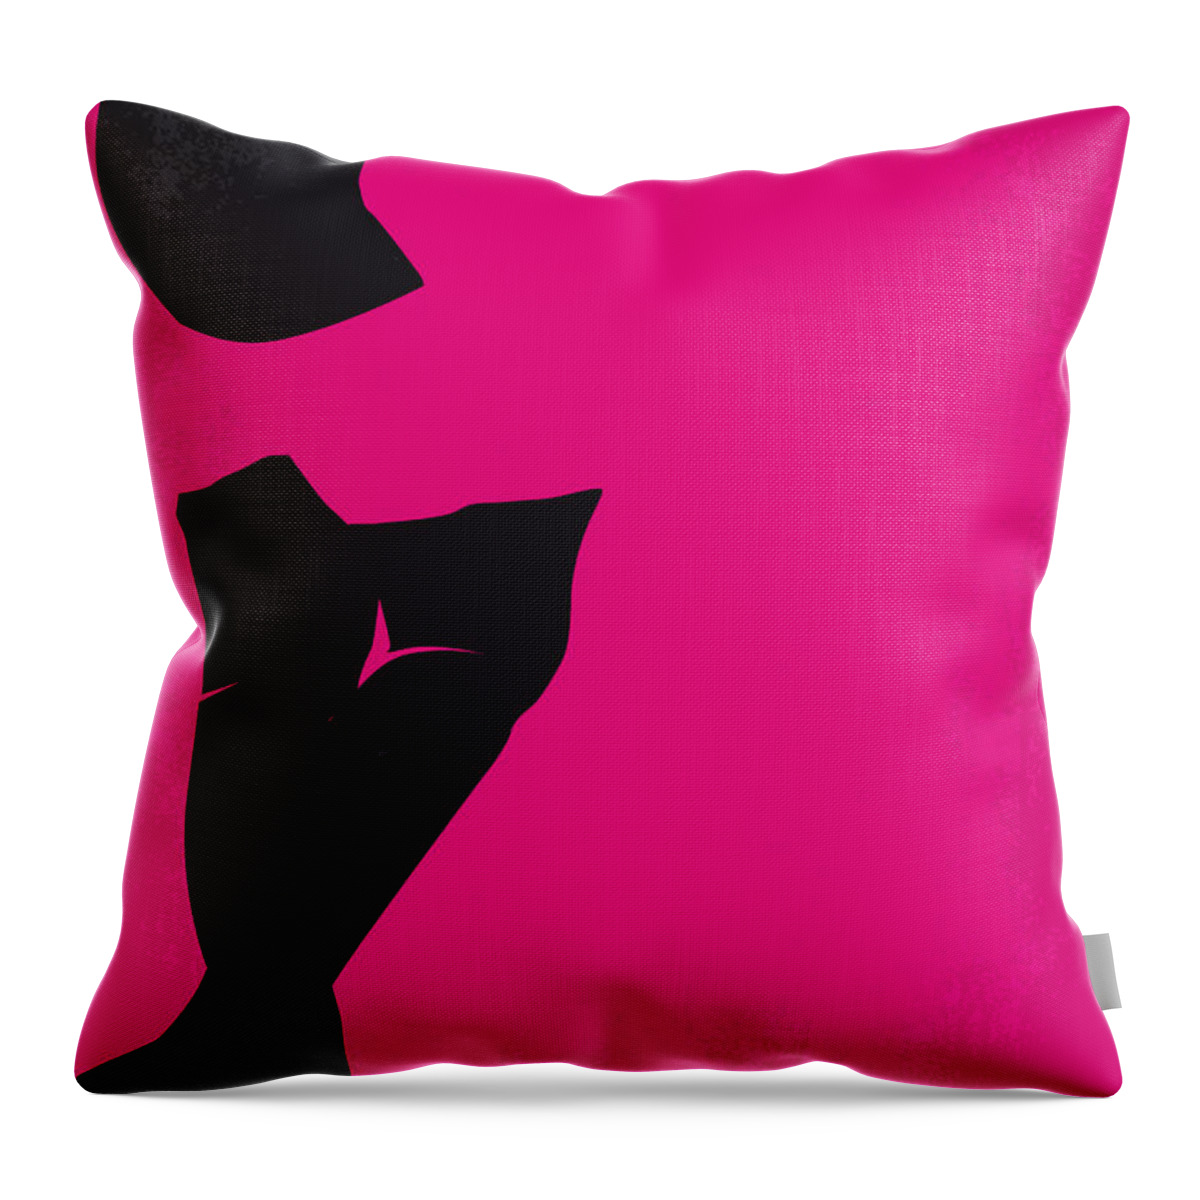 Pretty Woman Throw Pillow featuring the digital art No307 My Pretty Woman minimal movie poster by Chungkong Art